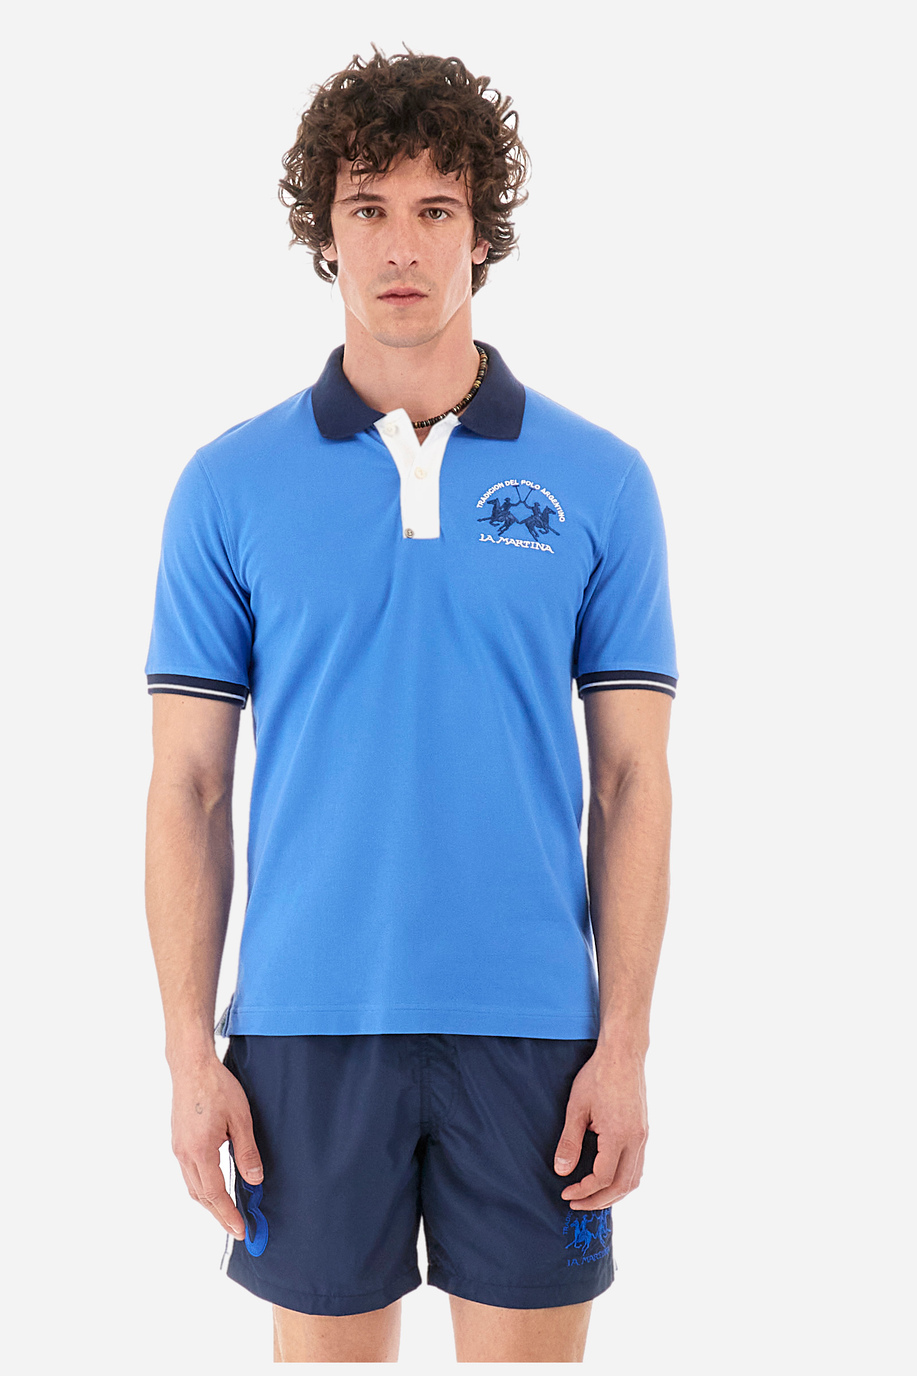 Regular-fit polo shirt in elasticated cotton - Trixie - Spring looks for him | La Martina - Official Online Shop